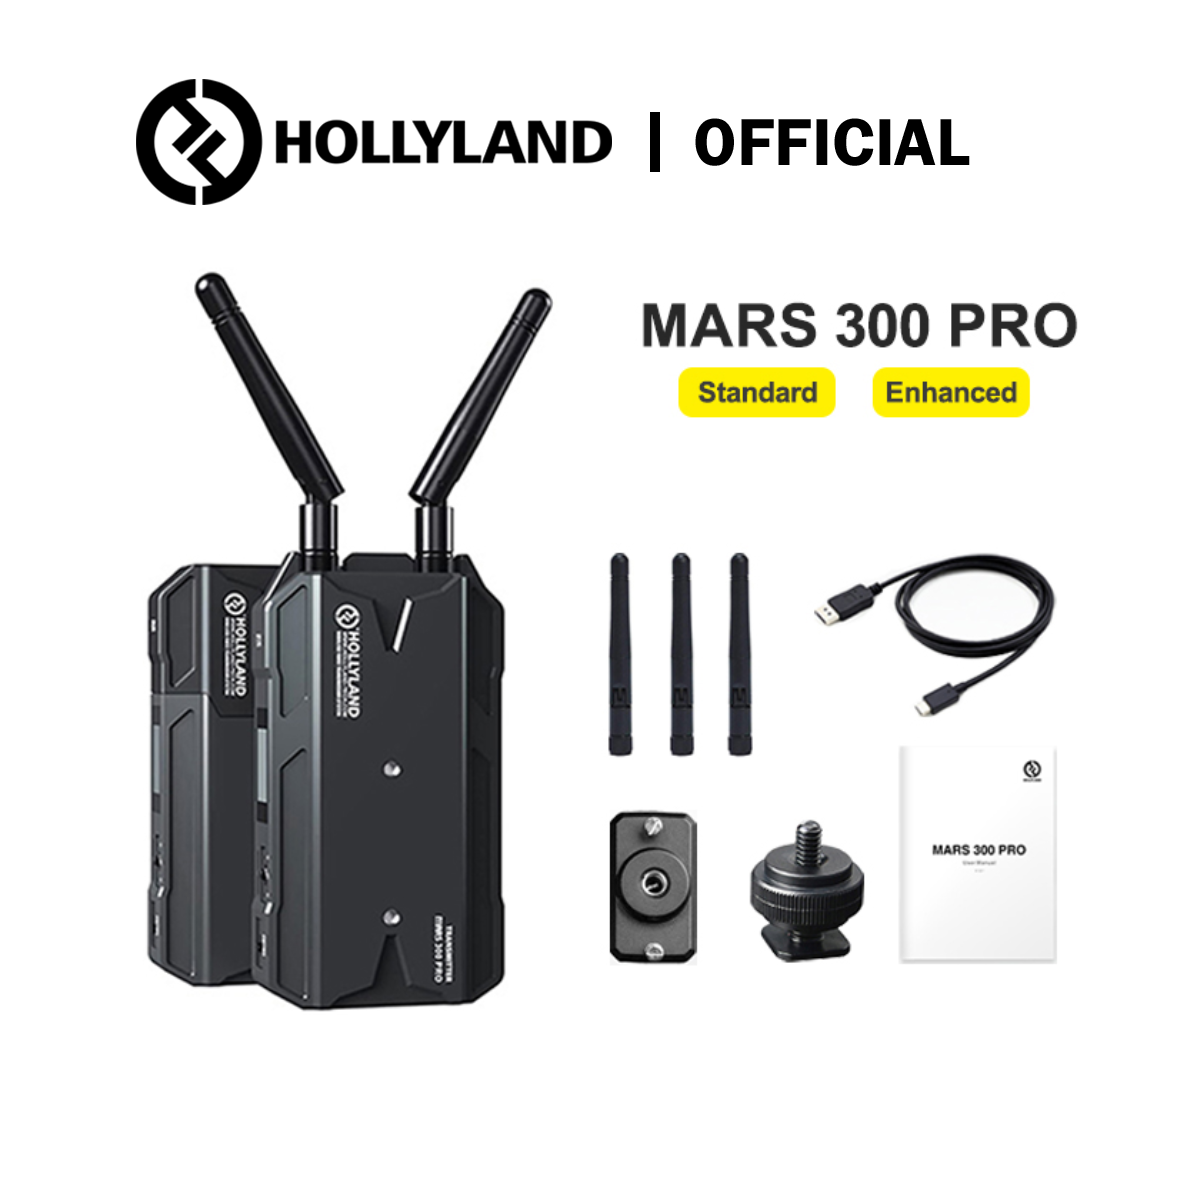 Hollyland Mars 300 Pro Enhanced Wireless Video Transmitter & Receiver 300Ft  Range 1080p HDMI 5G 0.08S Low Latency APP Support iOS Android [2 Battery